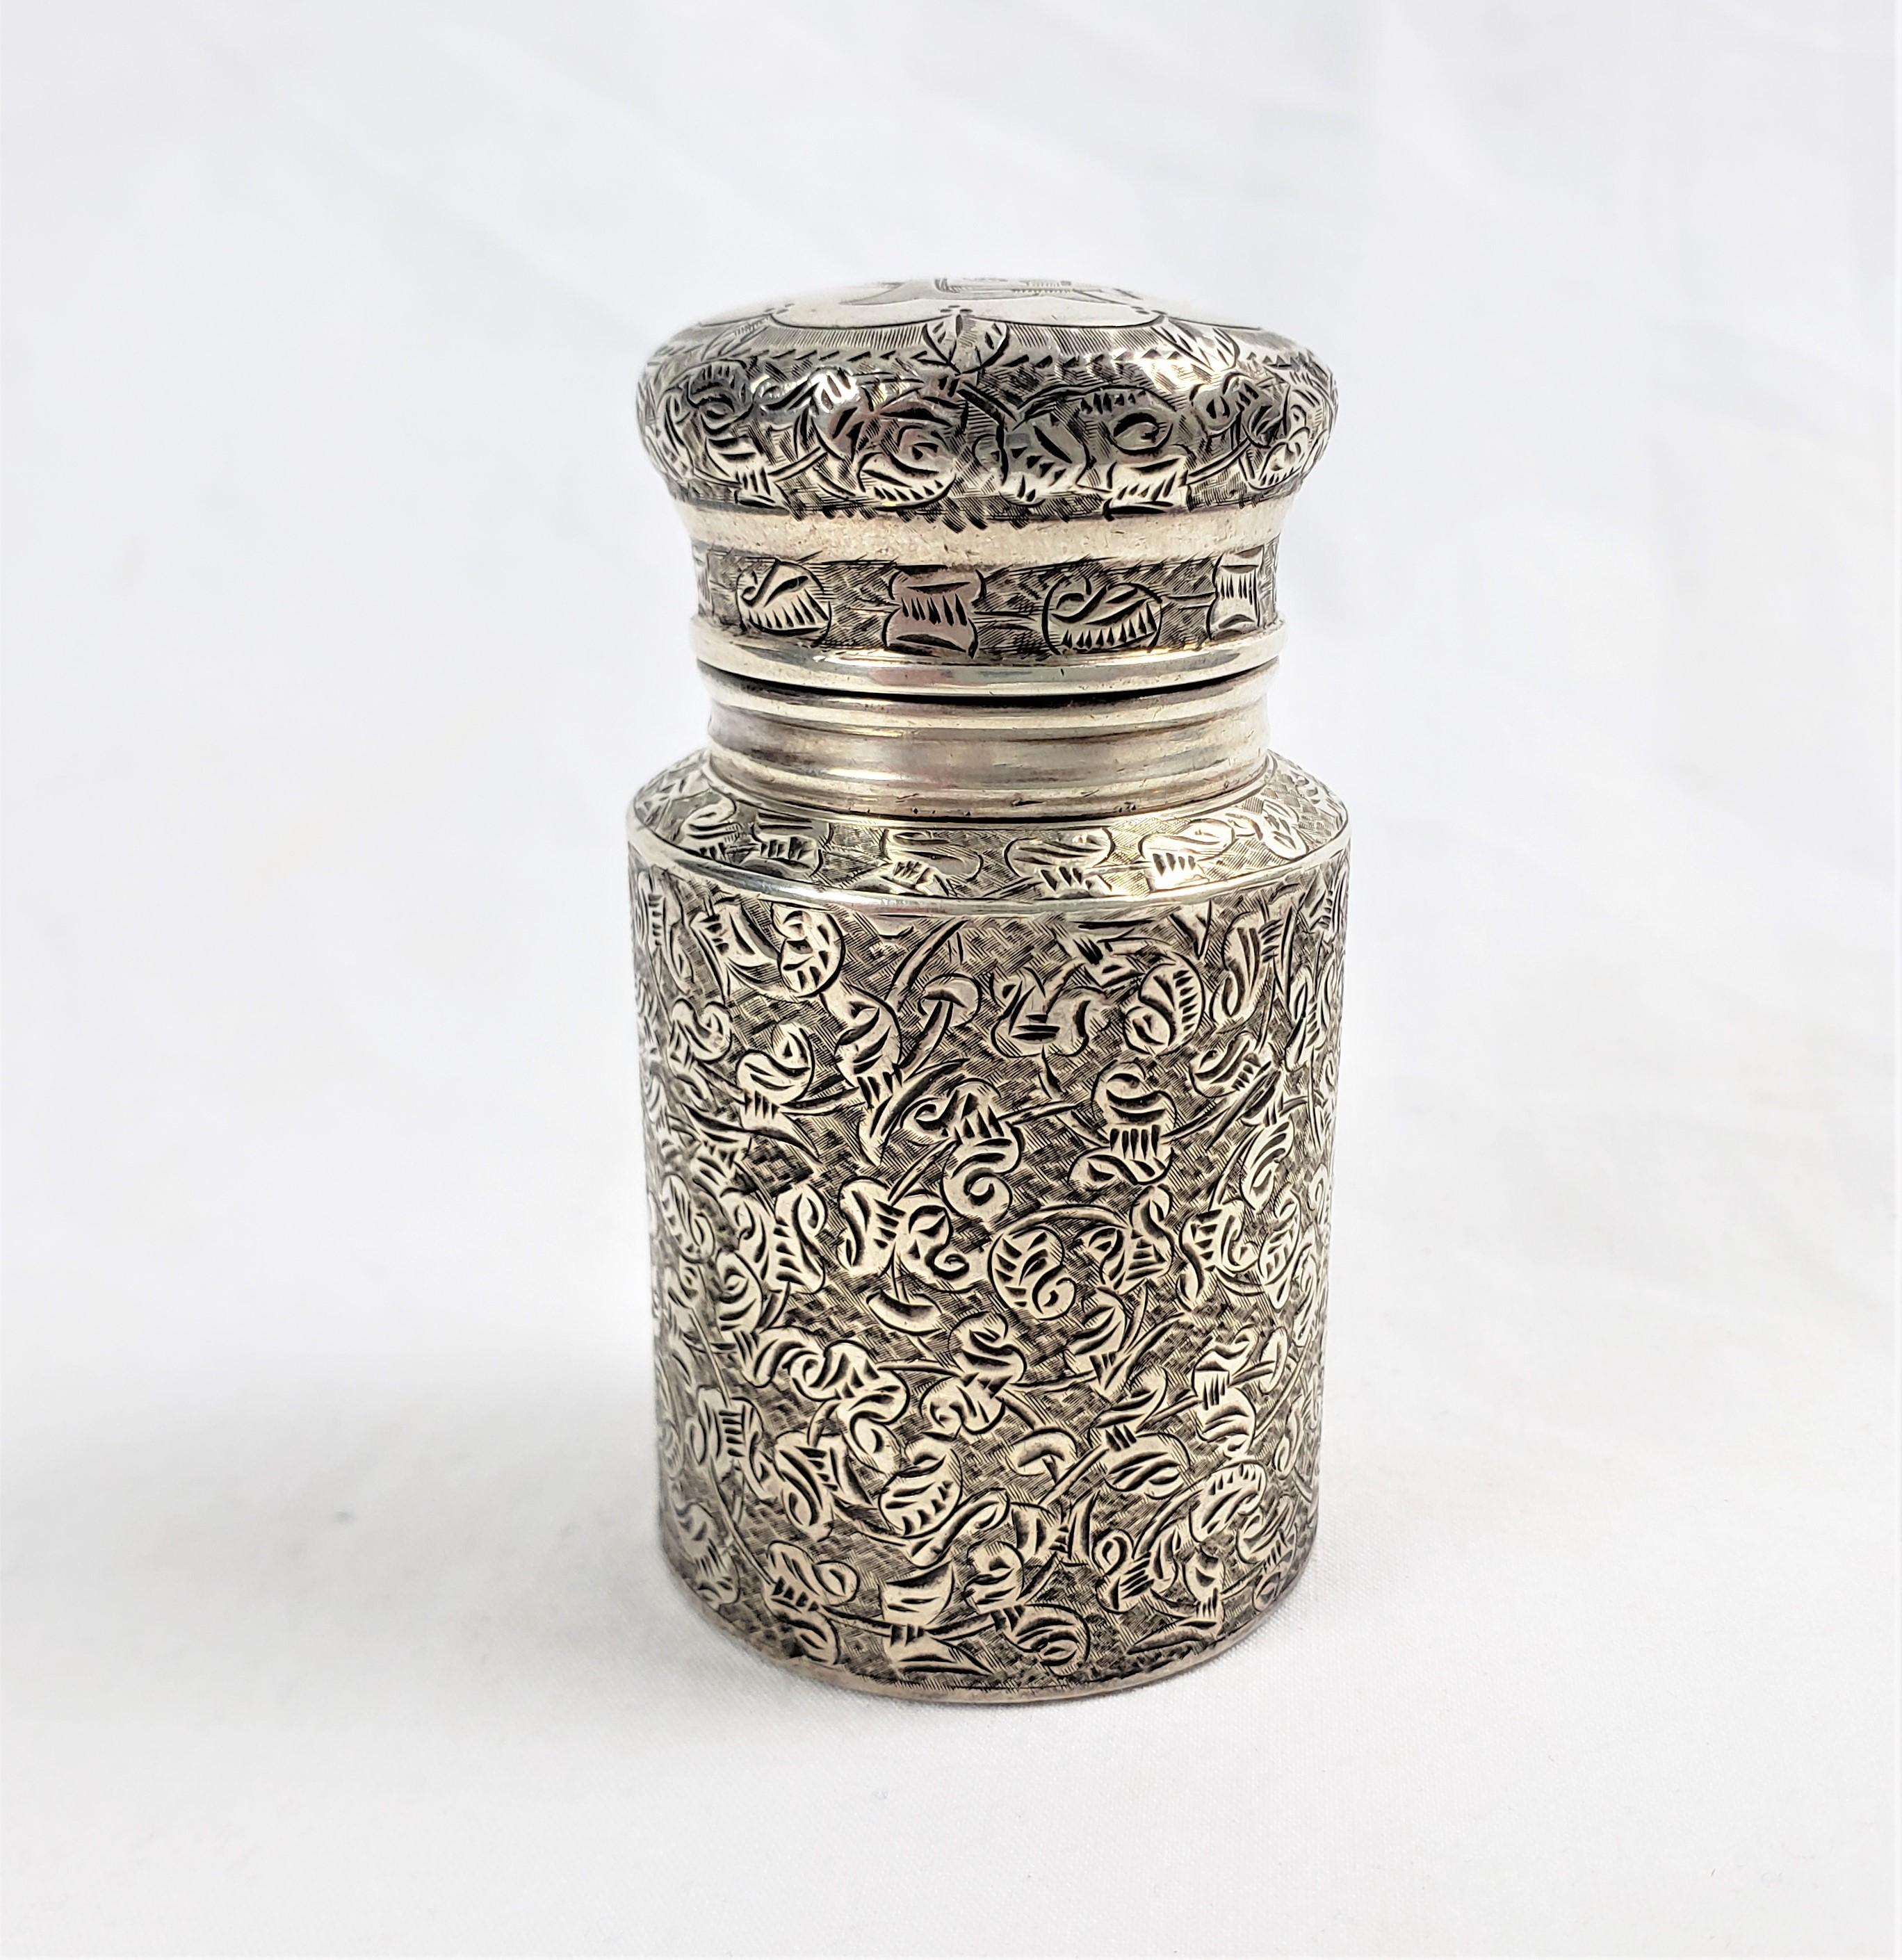 This antique perfume bottle is signed by an unknown English maker and dates to approximately 1898 and done in the period Victorian style. The bottle is done in sterling silver with a milk can shape with chased decoration on both the top and sides.